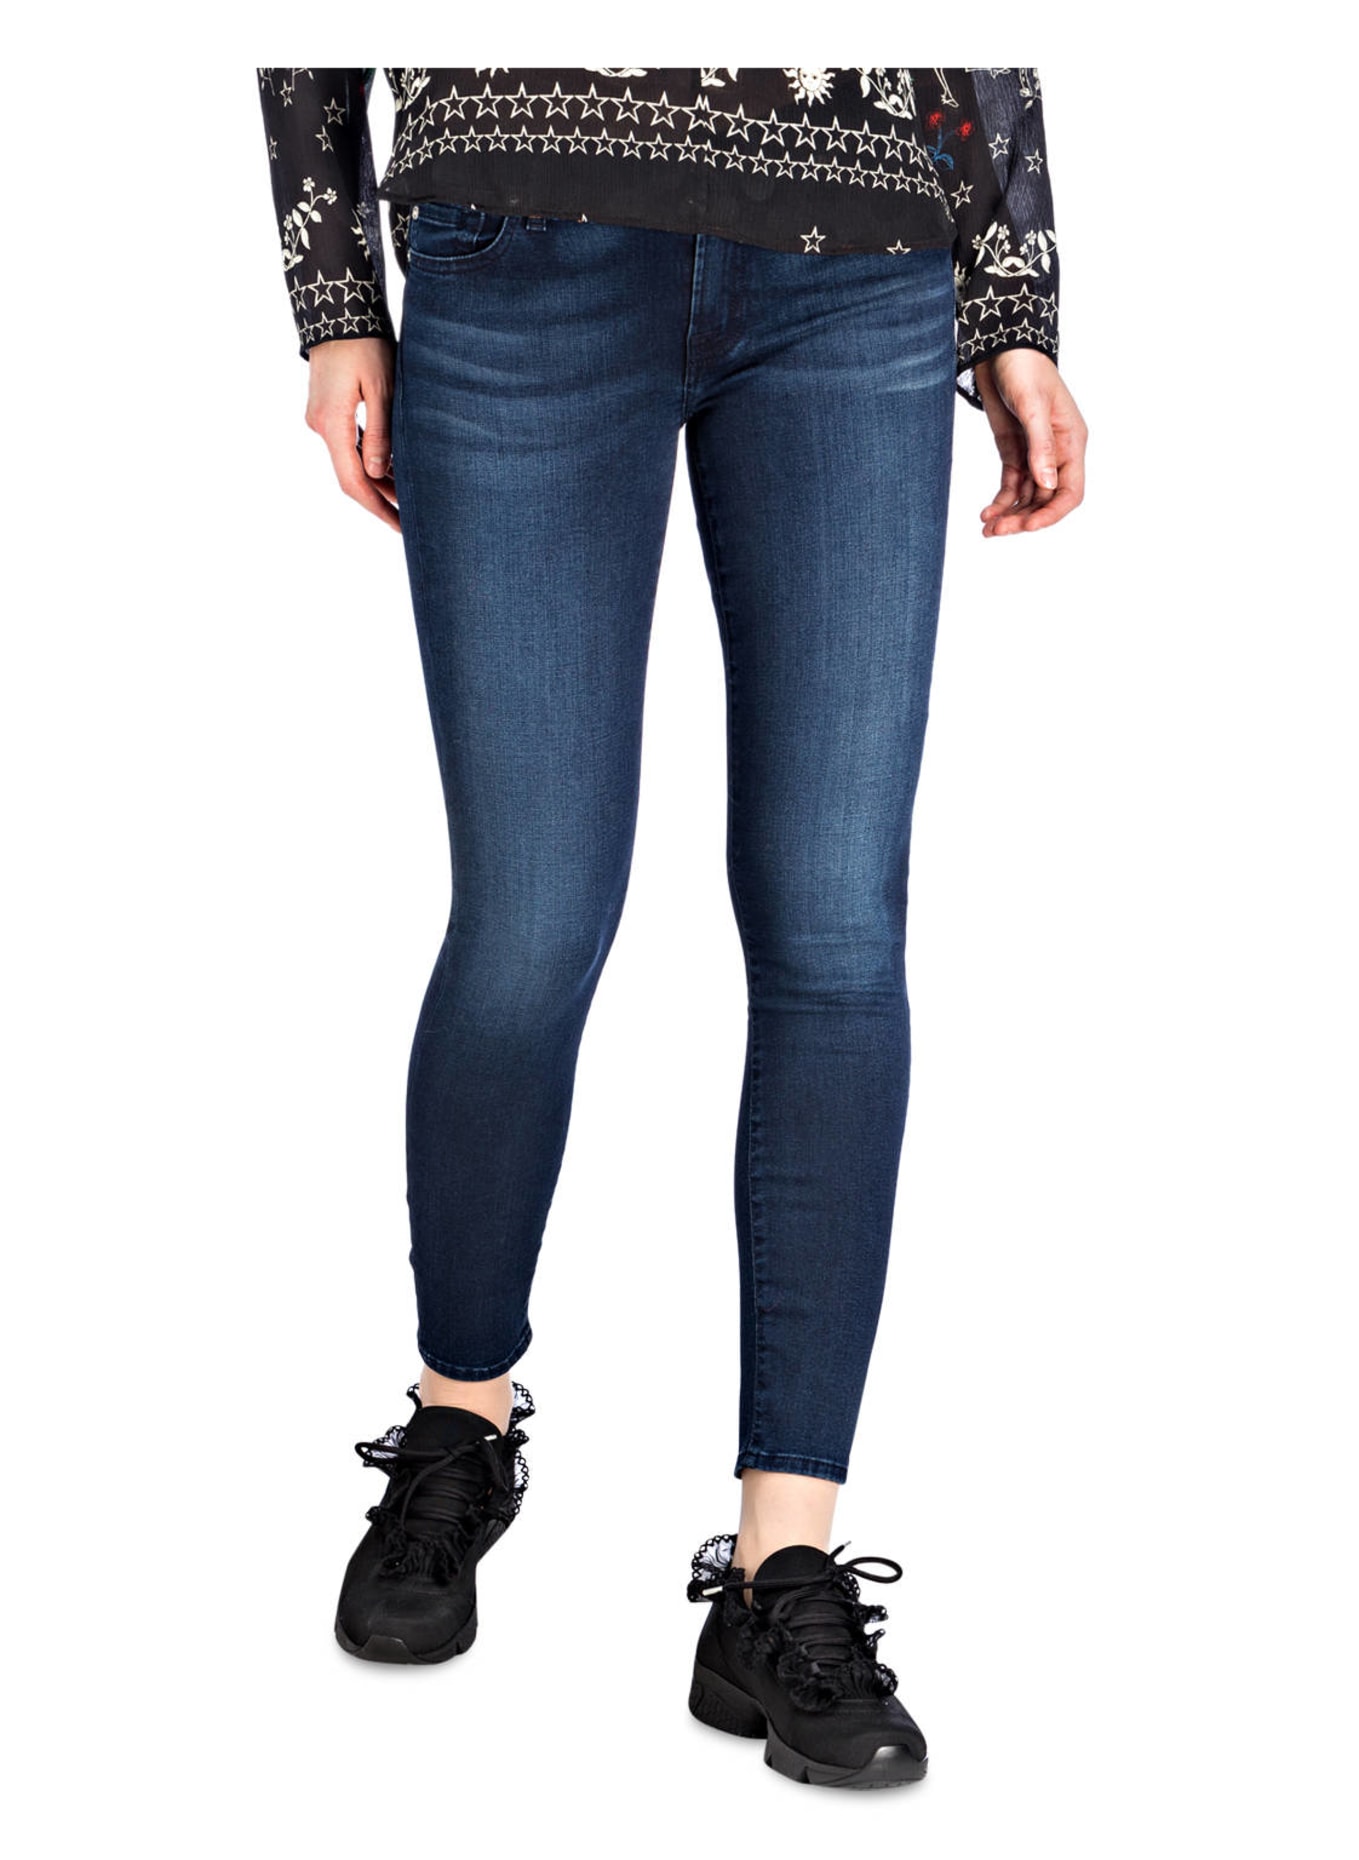 7 for all mankind Cropped-Jeans THE SKINNY CROP, Farbe: UF BAIR PARK AVENUE DARKBLUE (Bild 2)